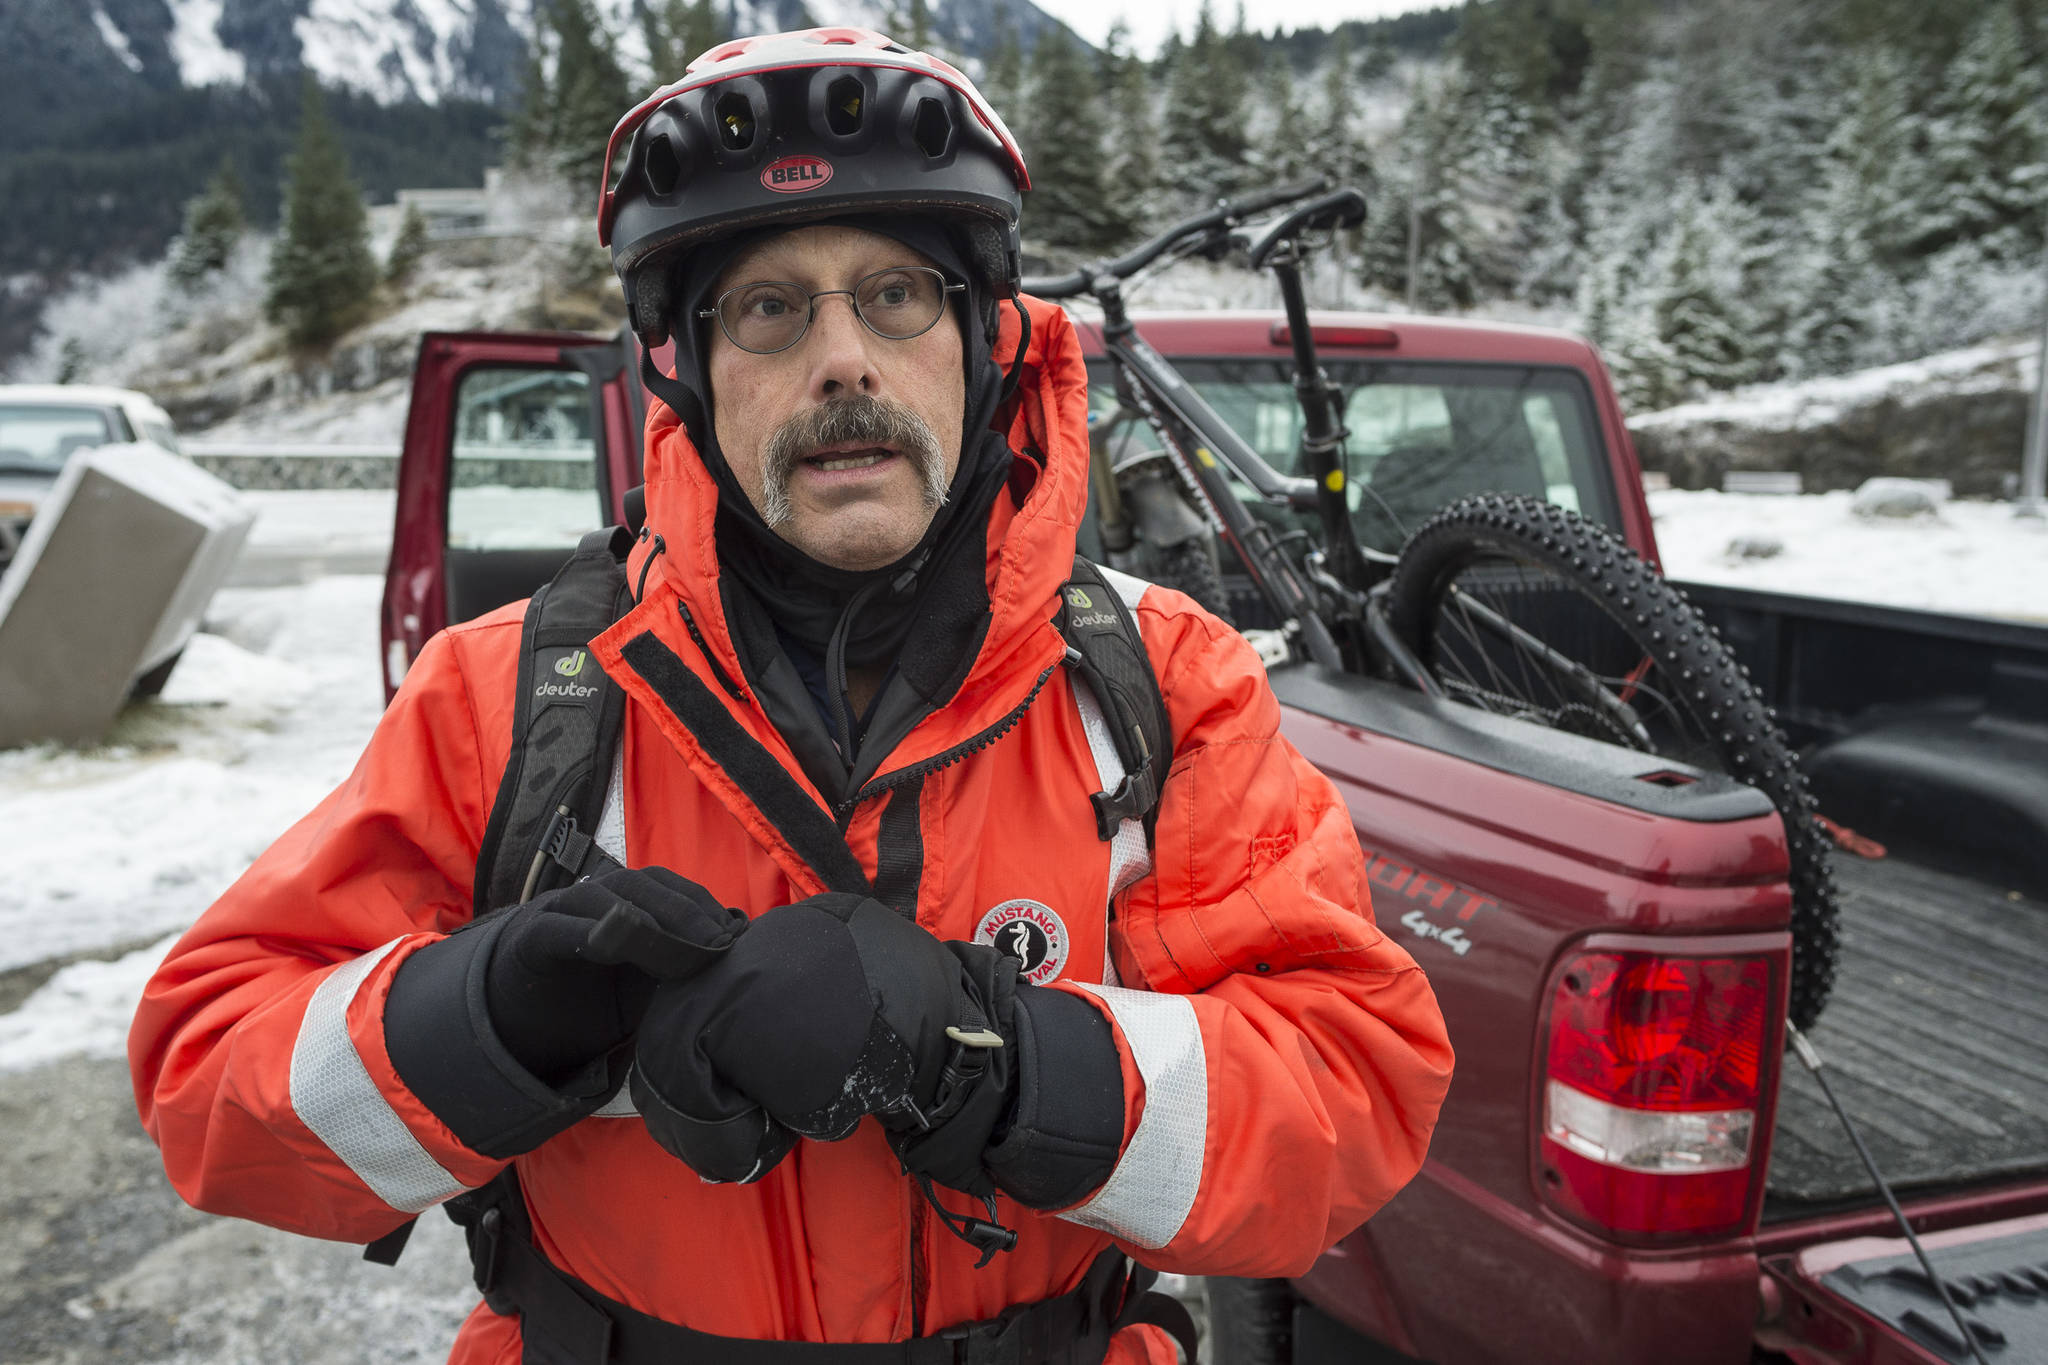 Bob Funk retells his story on Monday, Jan. 7, 2019, of falling through thin ice while riding his bicycle on Mendenhall Lake near the face of the Mendenhall Glacier on Sunday. He was rescued by a skater who was carrying a throw rope. Funk said, “I went in and I think adrenaline took care of the first initial cold impact. I was busy working to get up on the ice and when I would it would break out from under me. I don’t know if I had enough in the tank to get myself out.” (Michael Penn | Juneau Empire)